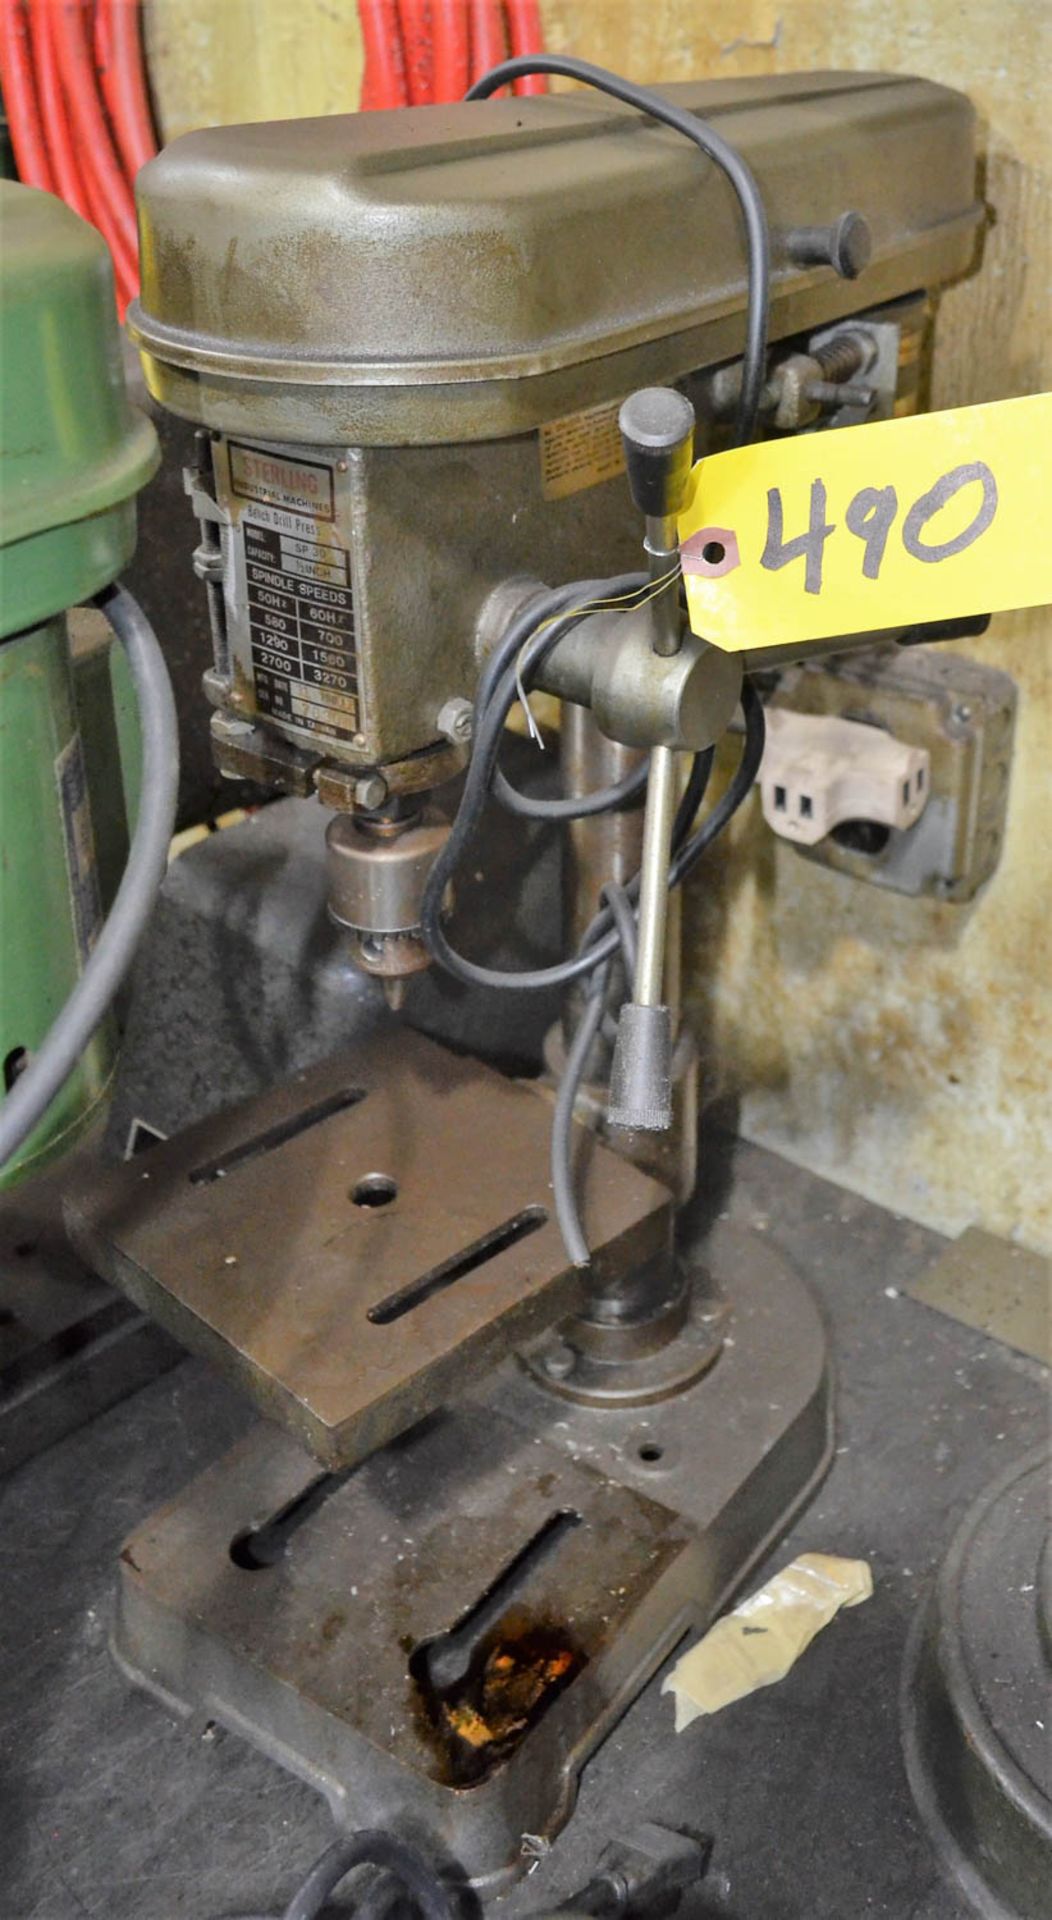 STERLING MACHINES MDL. SP-30 BENCH TOP DRILL PRESS, 580-3270 RPM, S/N: 76304